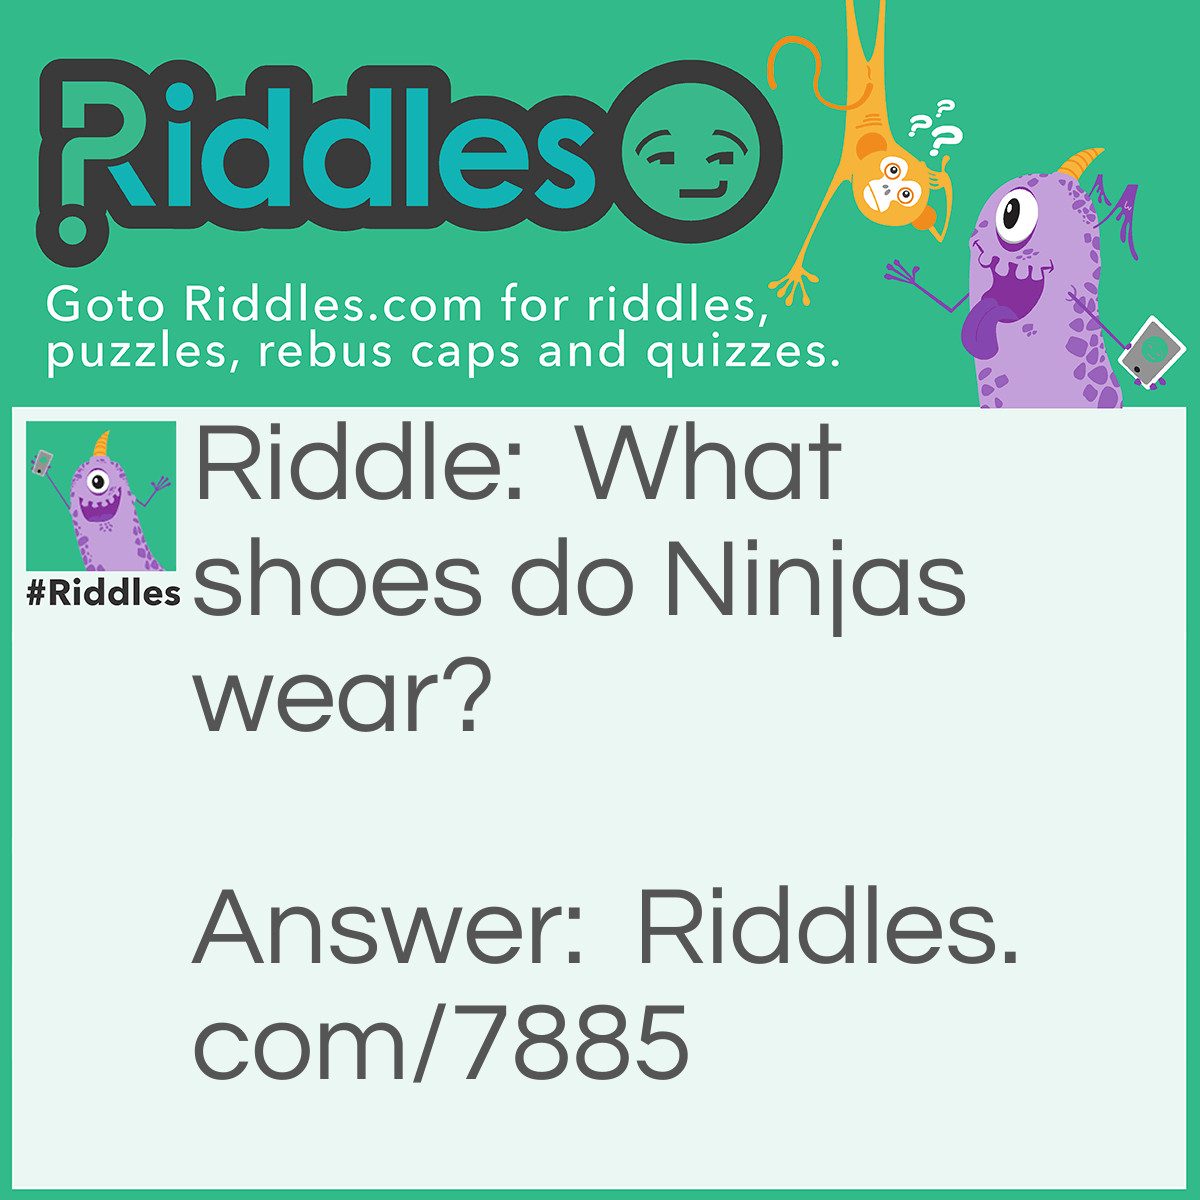 Riddle: What shoes do Ninjas wear? Answer: Sneakers